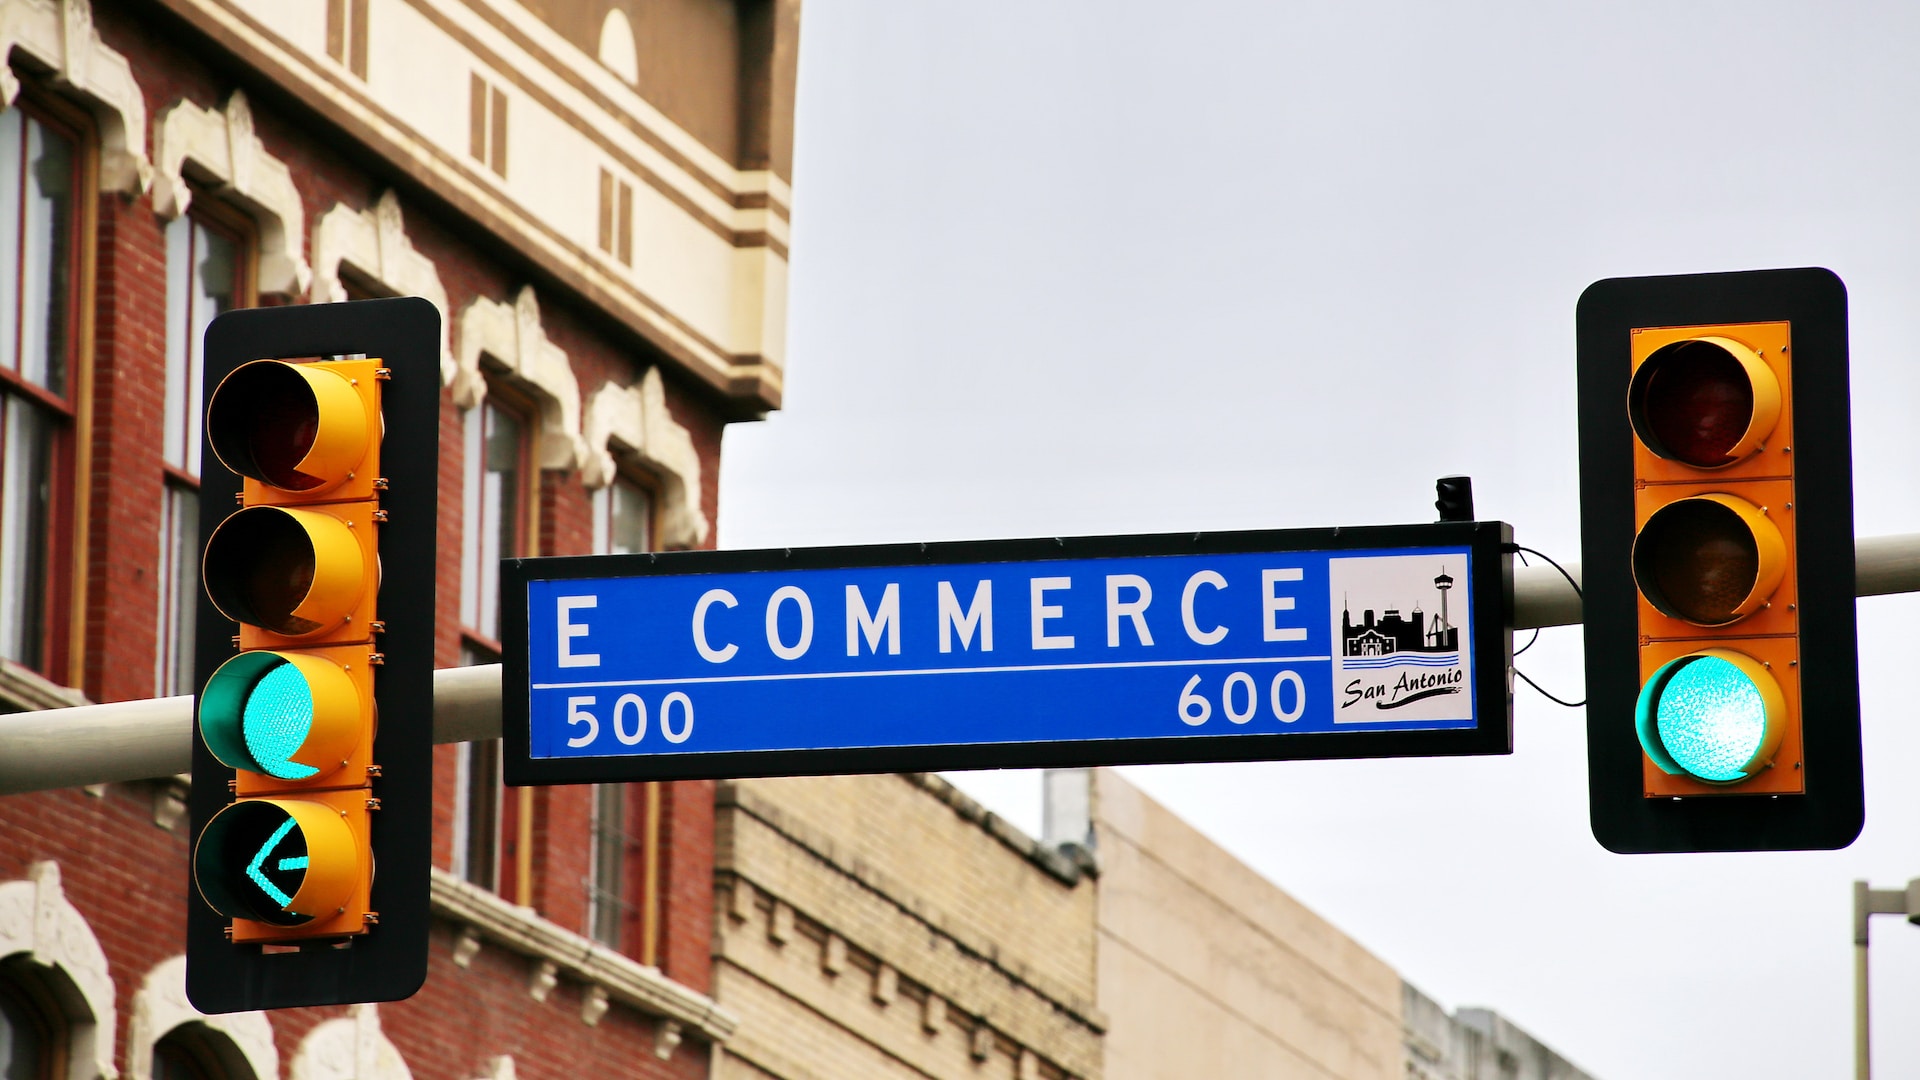 image of e-commerce sign in between two traffic lights showing green light | e-commerce